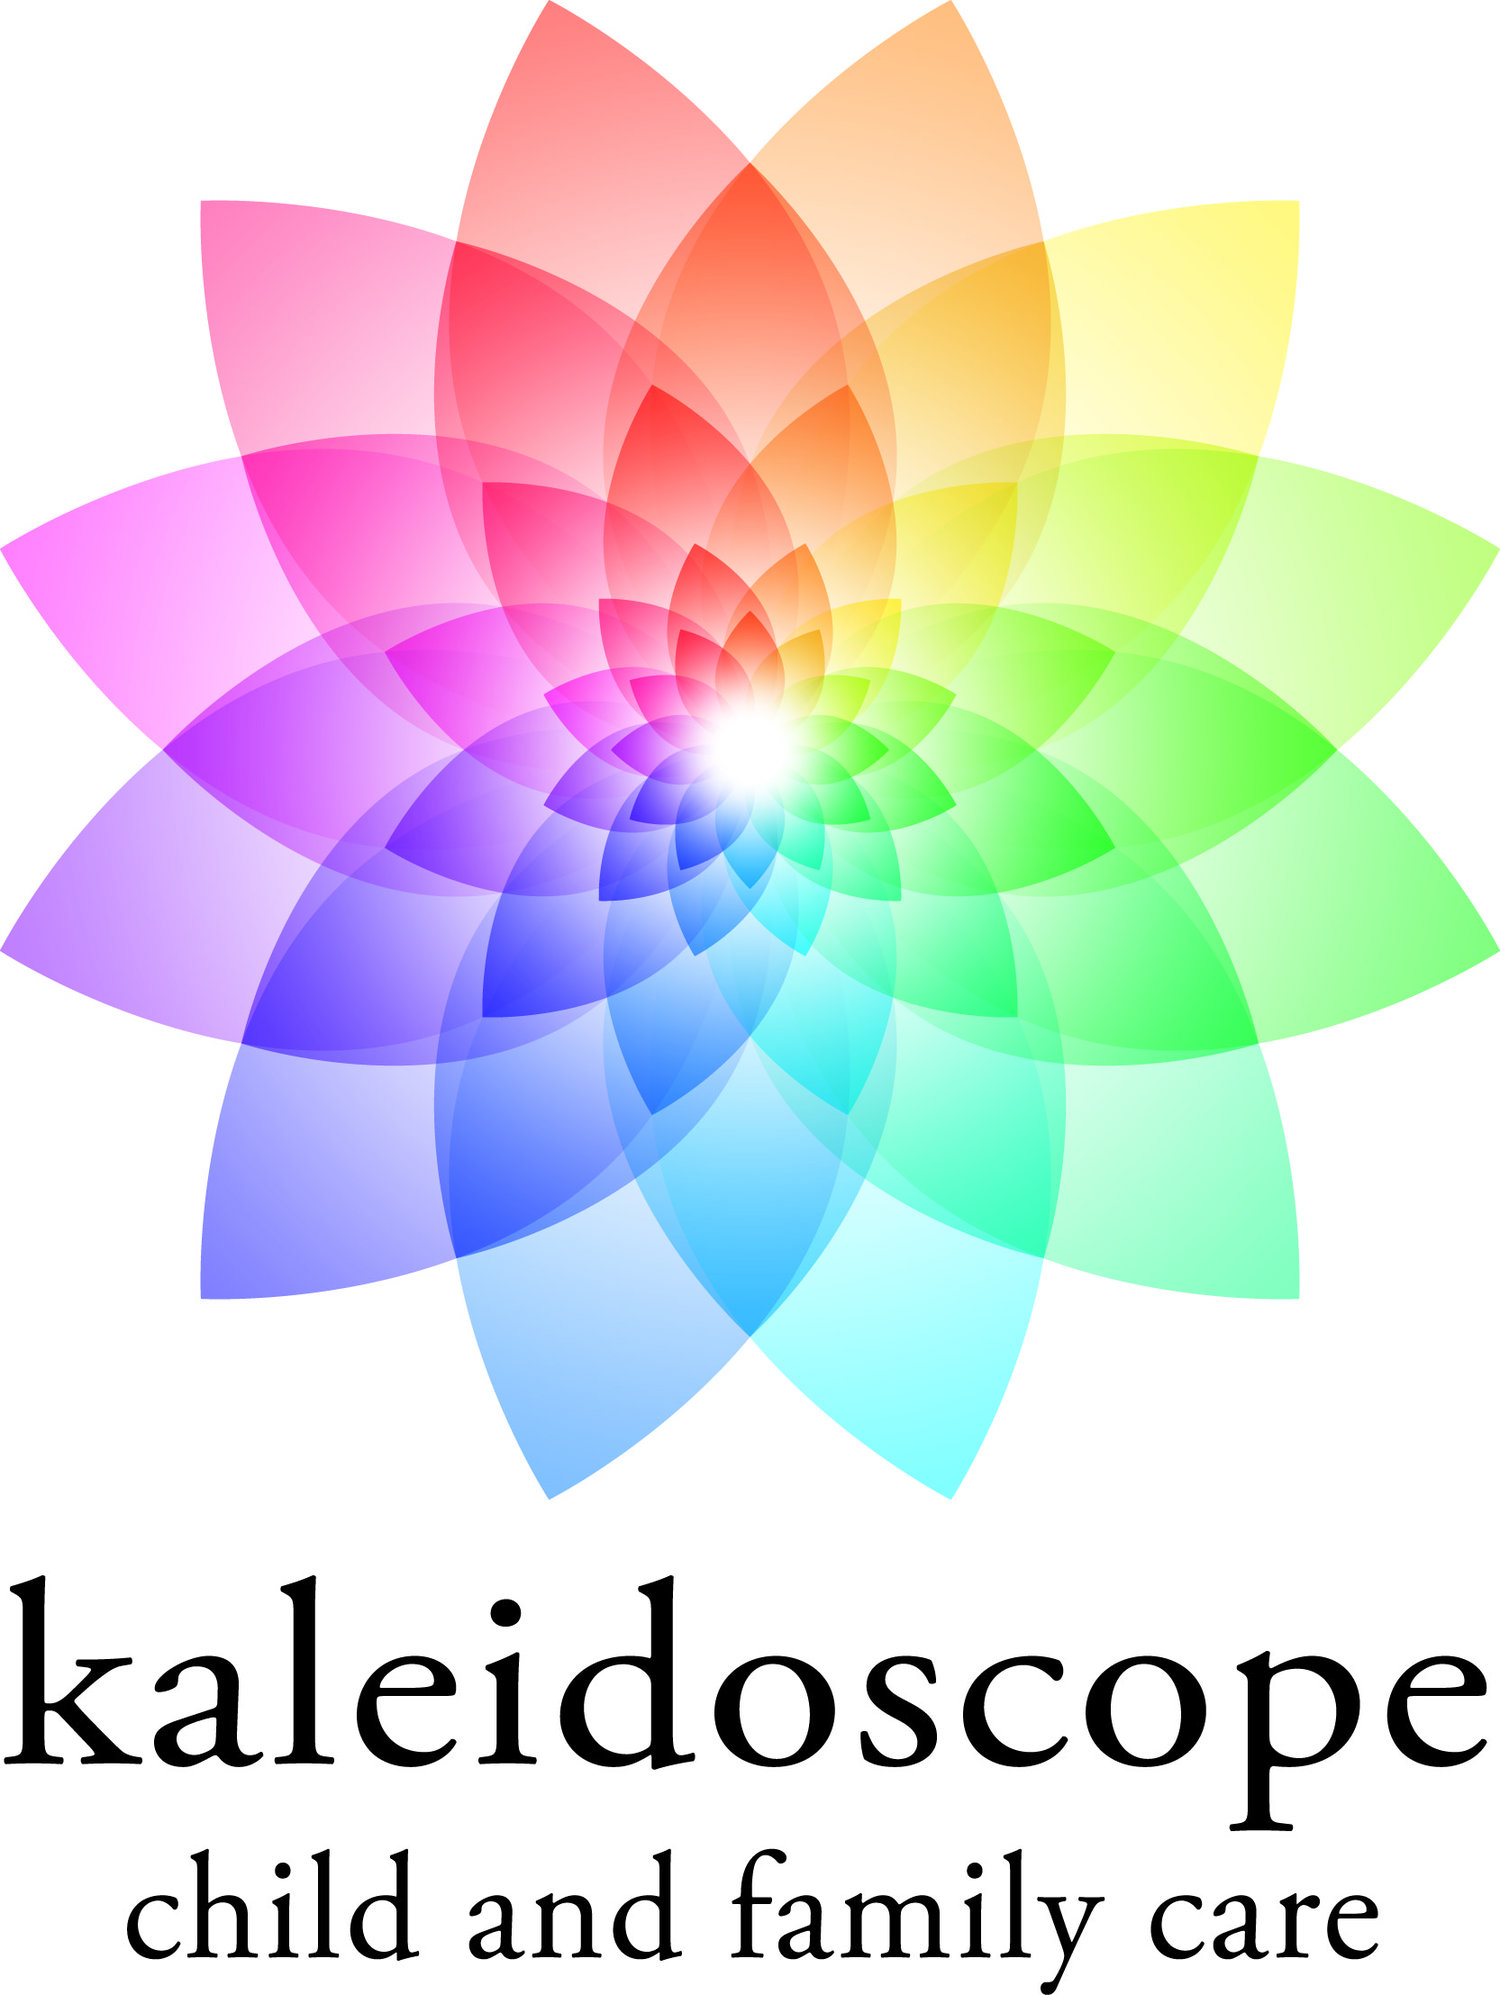 kaleidoscope child and family care